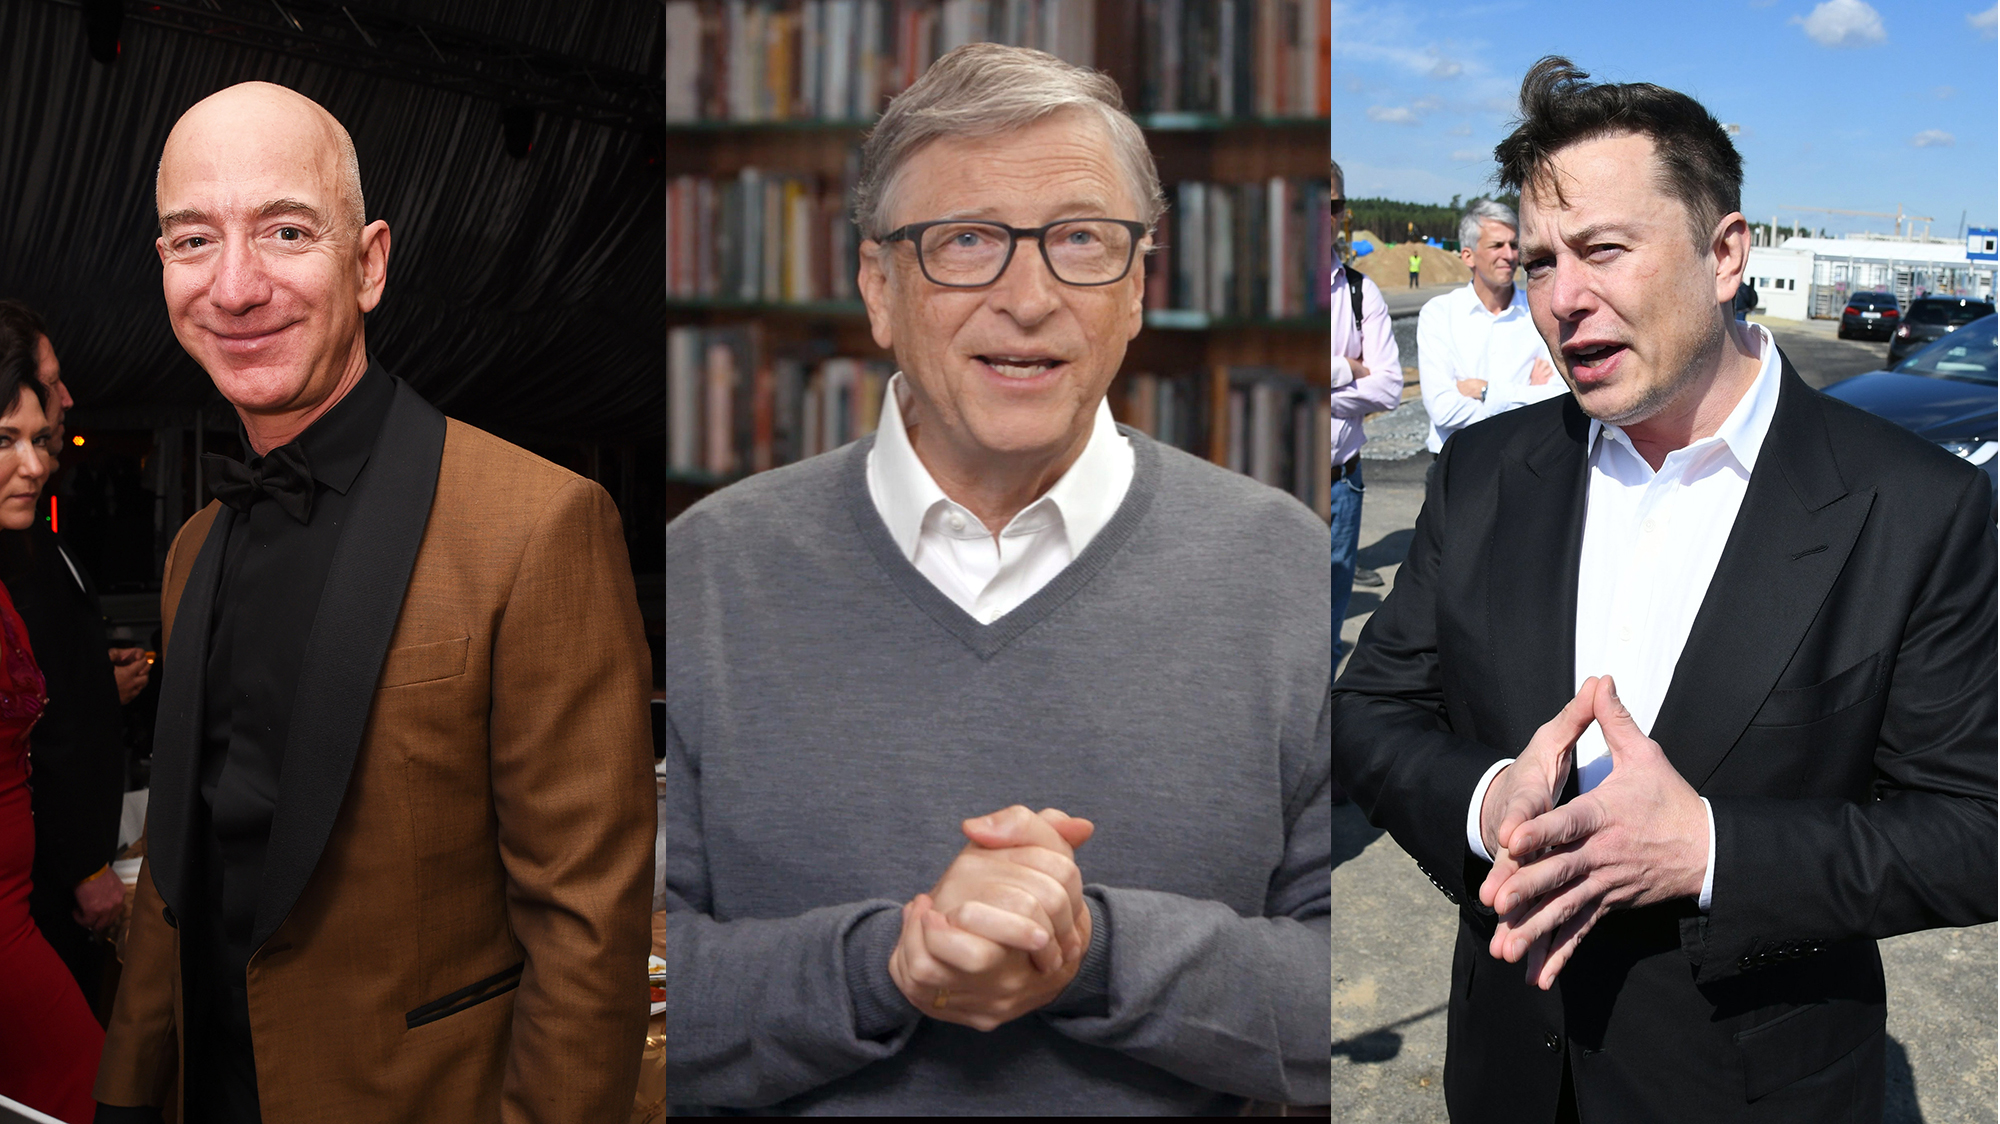 Latest MustHave for America’s UltraBillionaires A Plan to Save